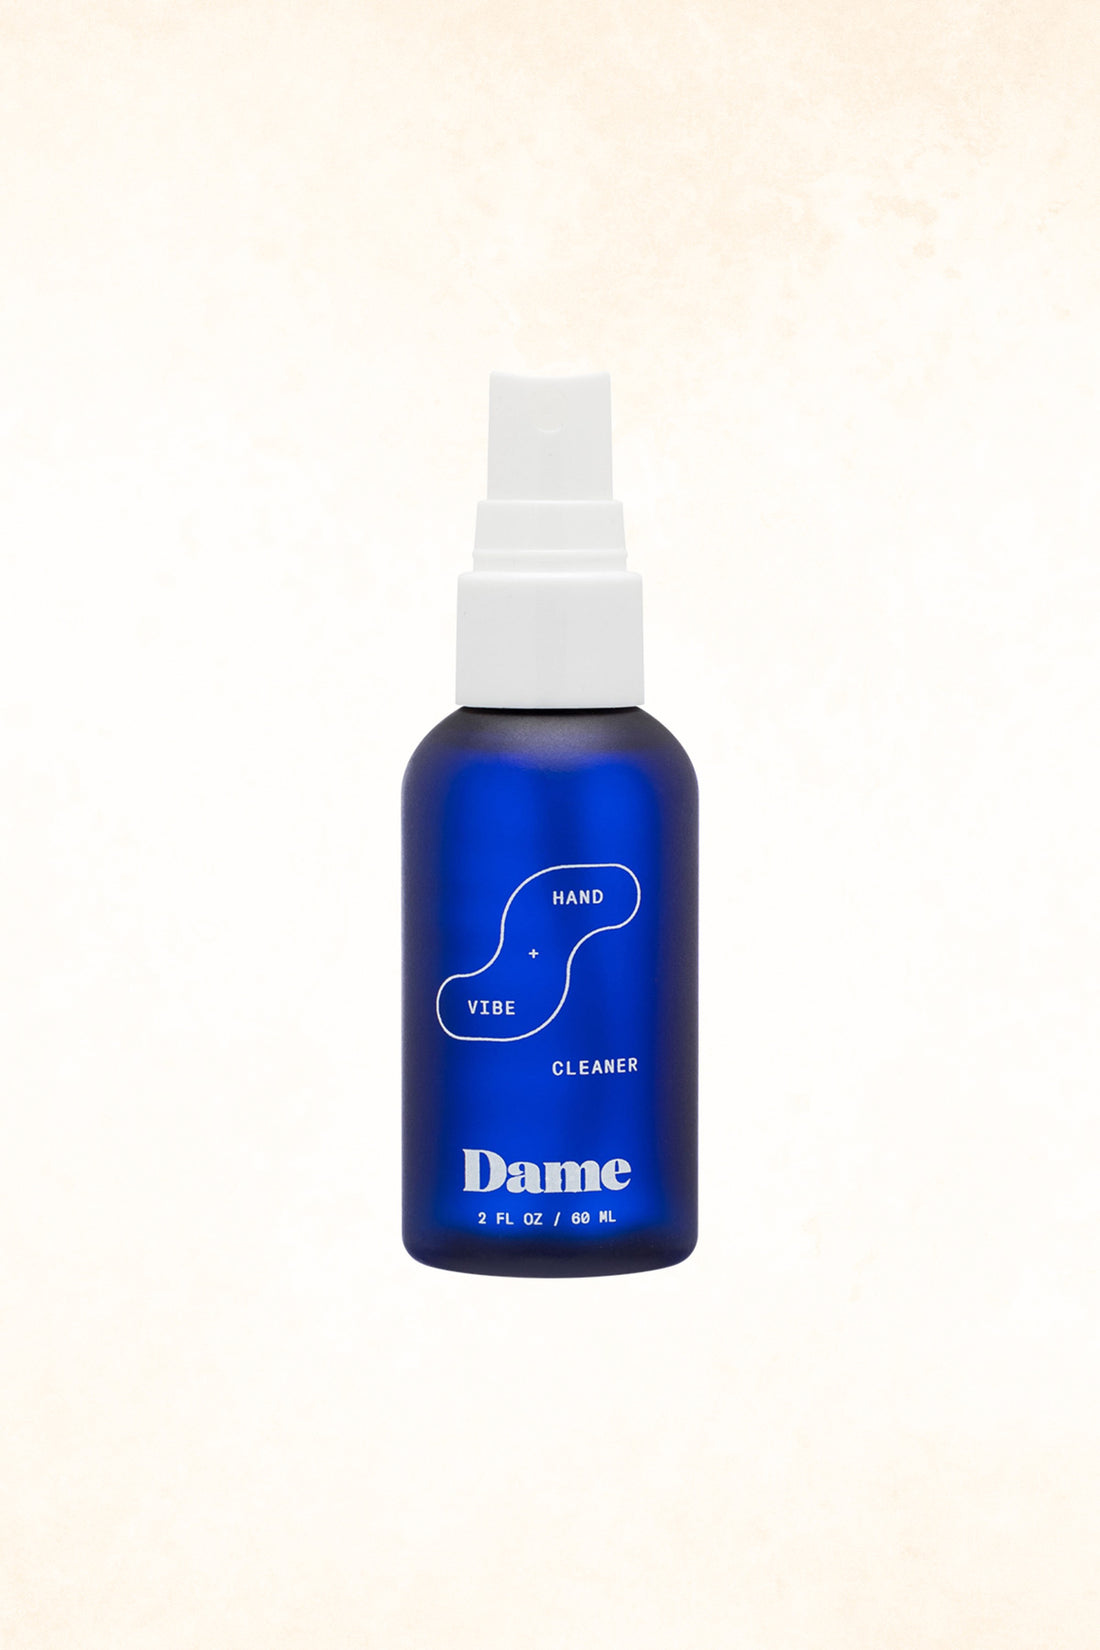 Dame Products - Hand + Vibe Cleaner